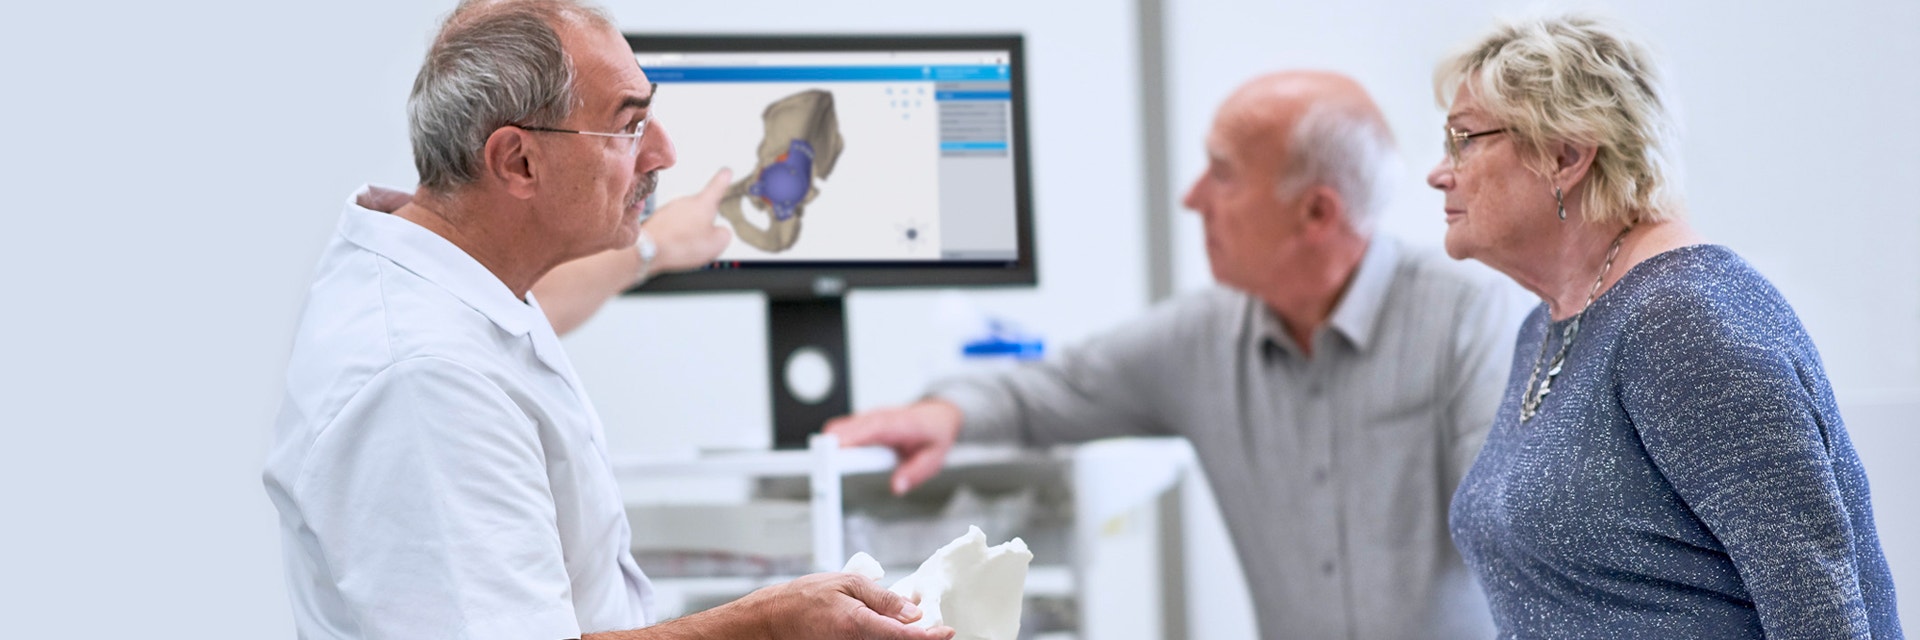 Doctor holding a 3D-printed anatomical model and pointing to a screen including the digital design of a personalized hip implant while talking to a patient